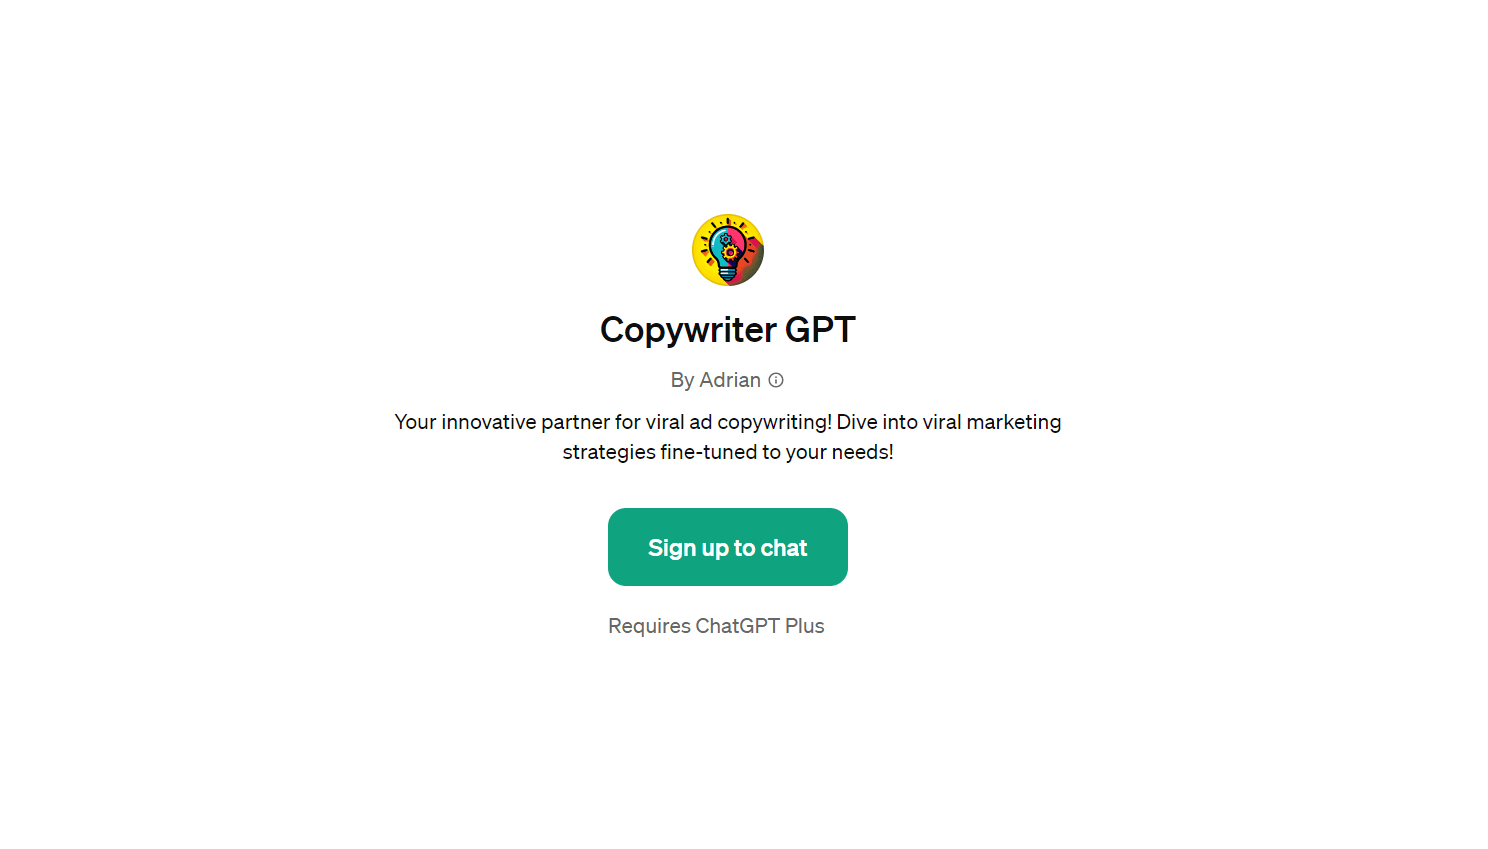 Copywriter GPT - Personal Copywriting Assistant for Viral Ads